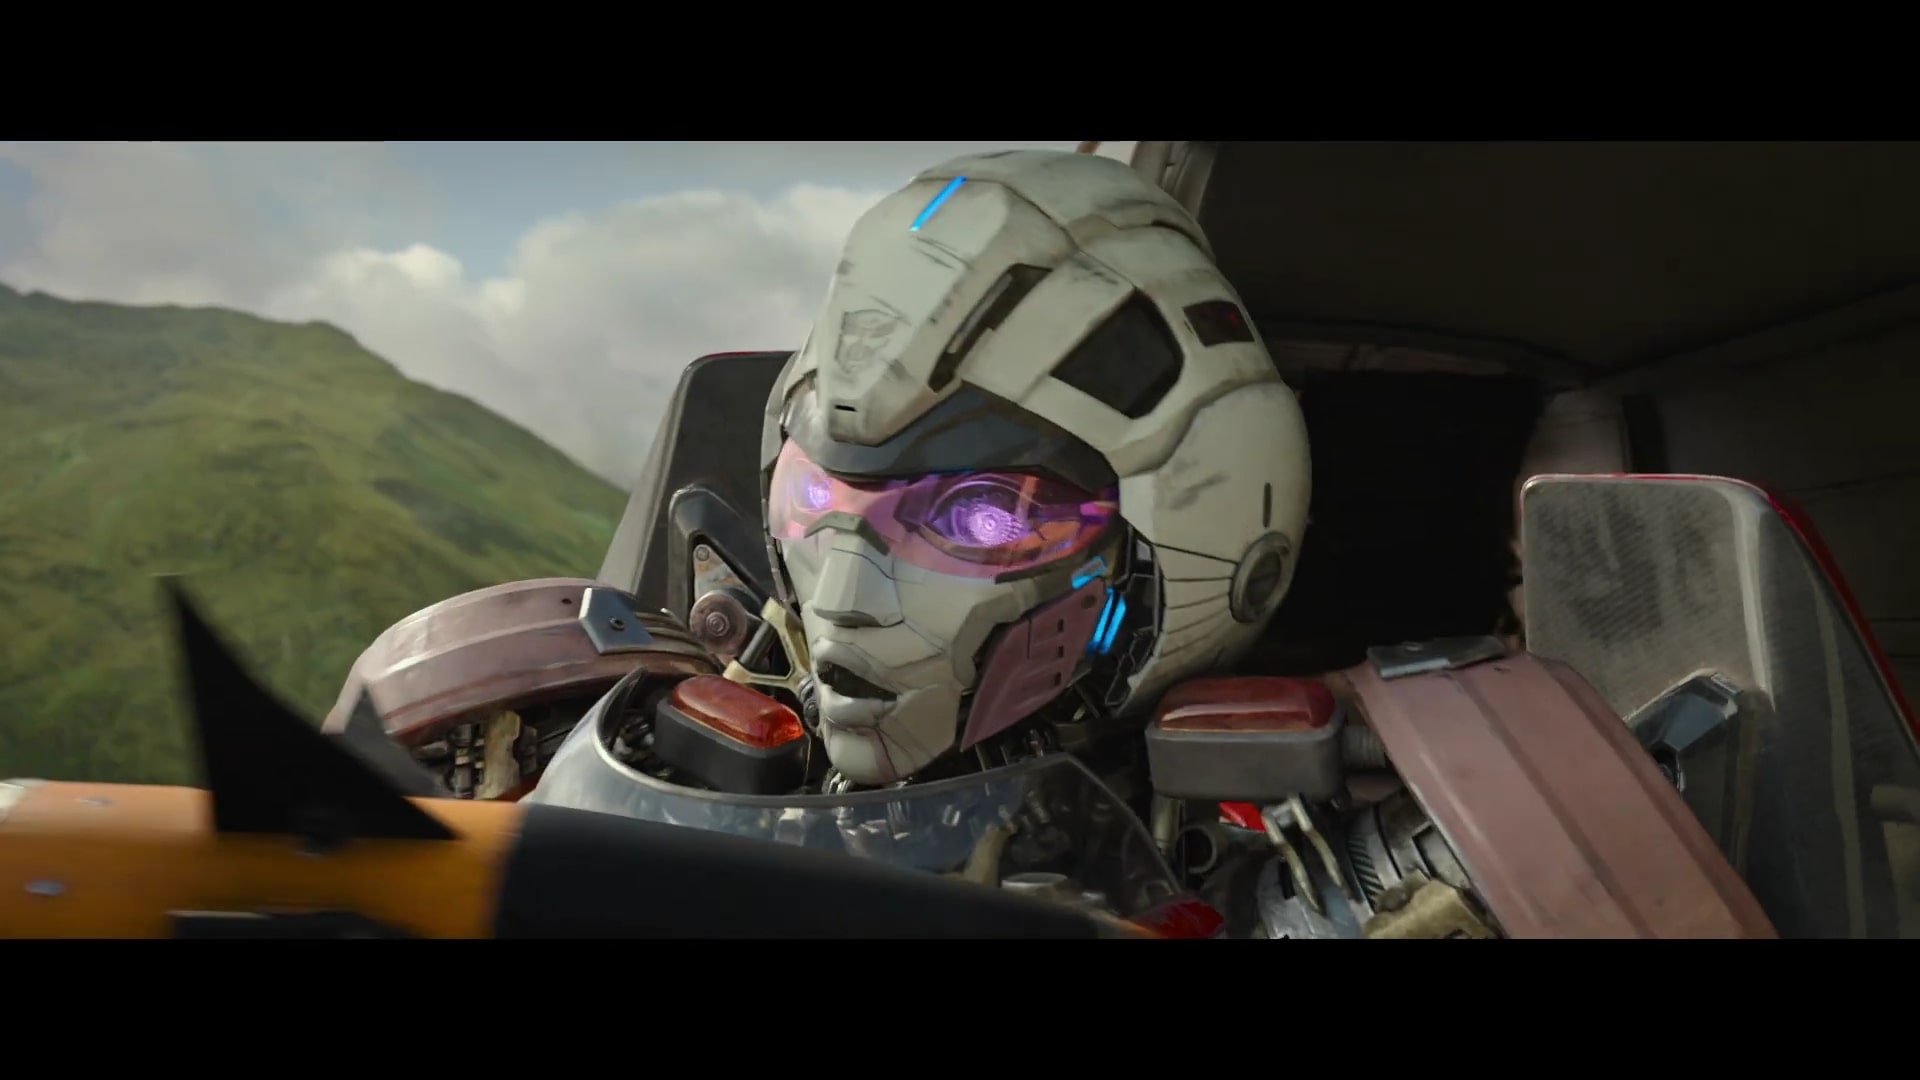 9convert.com - Transformers Rise of the Beasts Official Teaser Trailer 2023 Movie.mp4_000083291.jpg